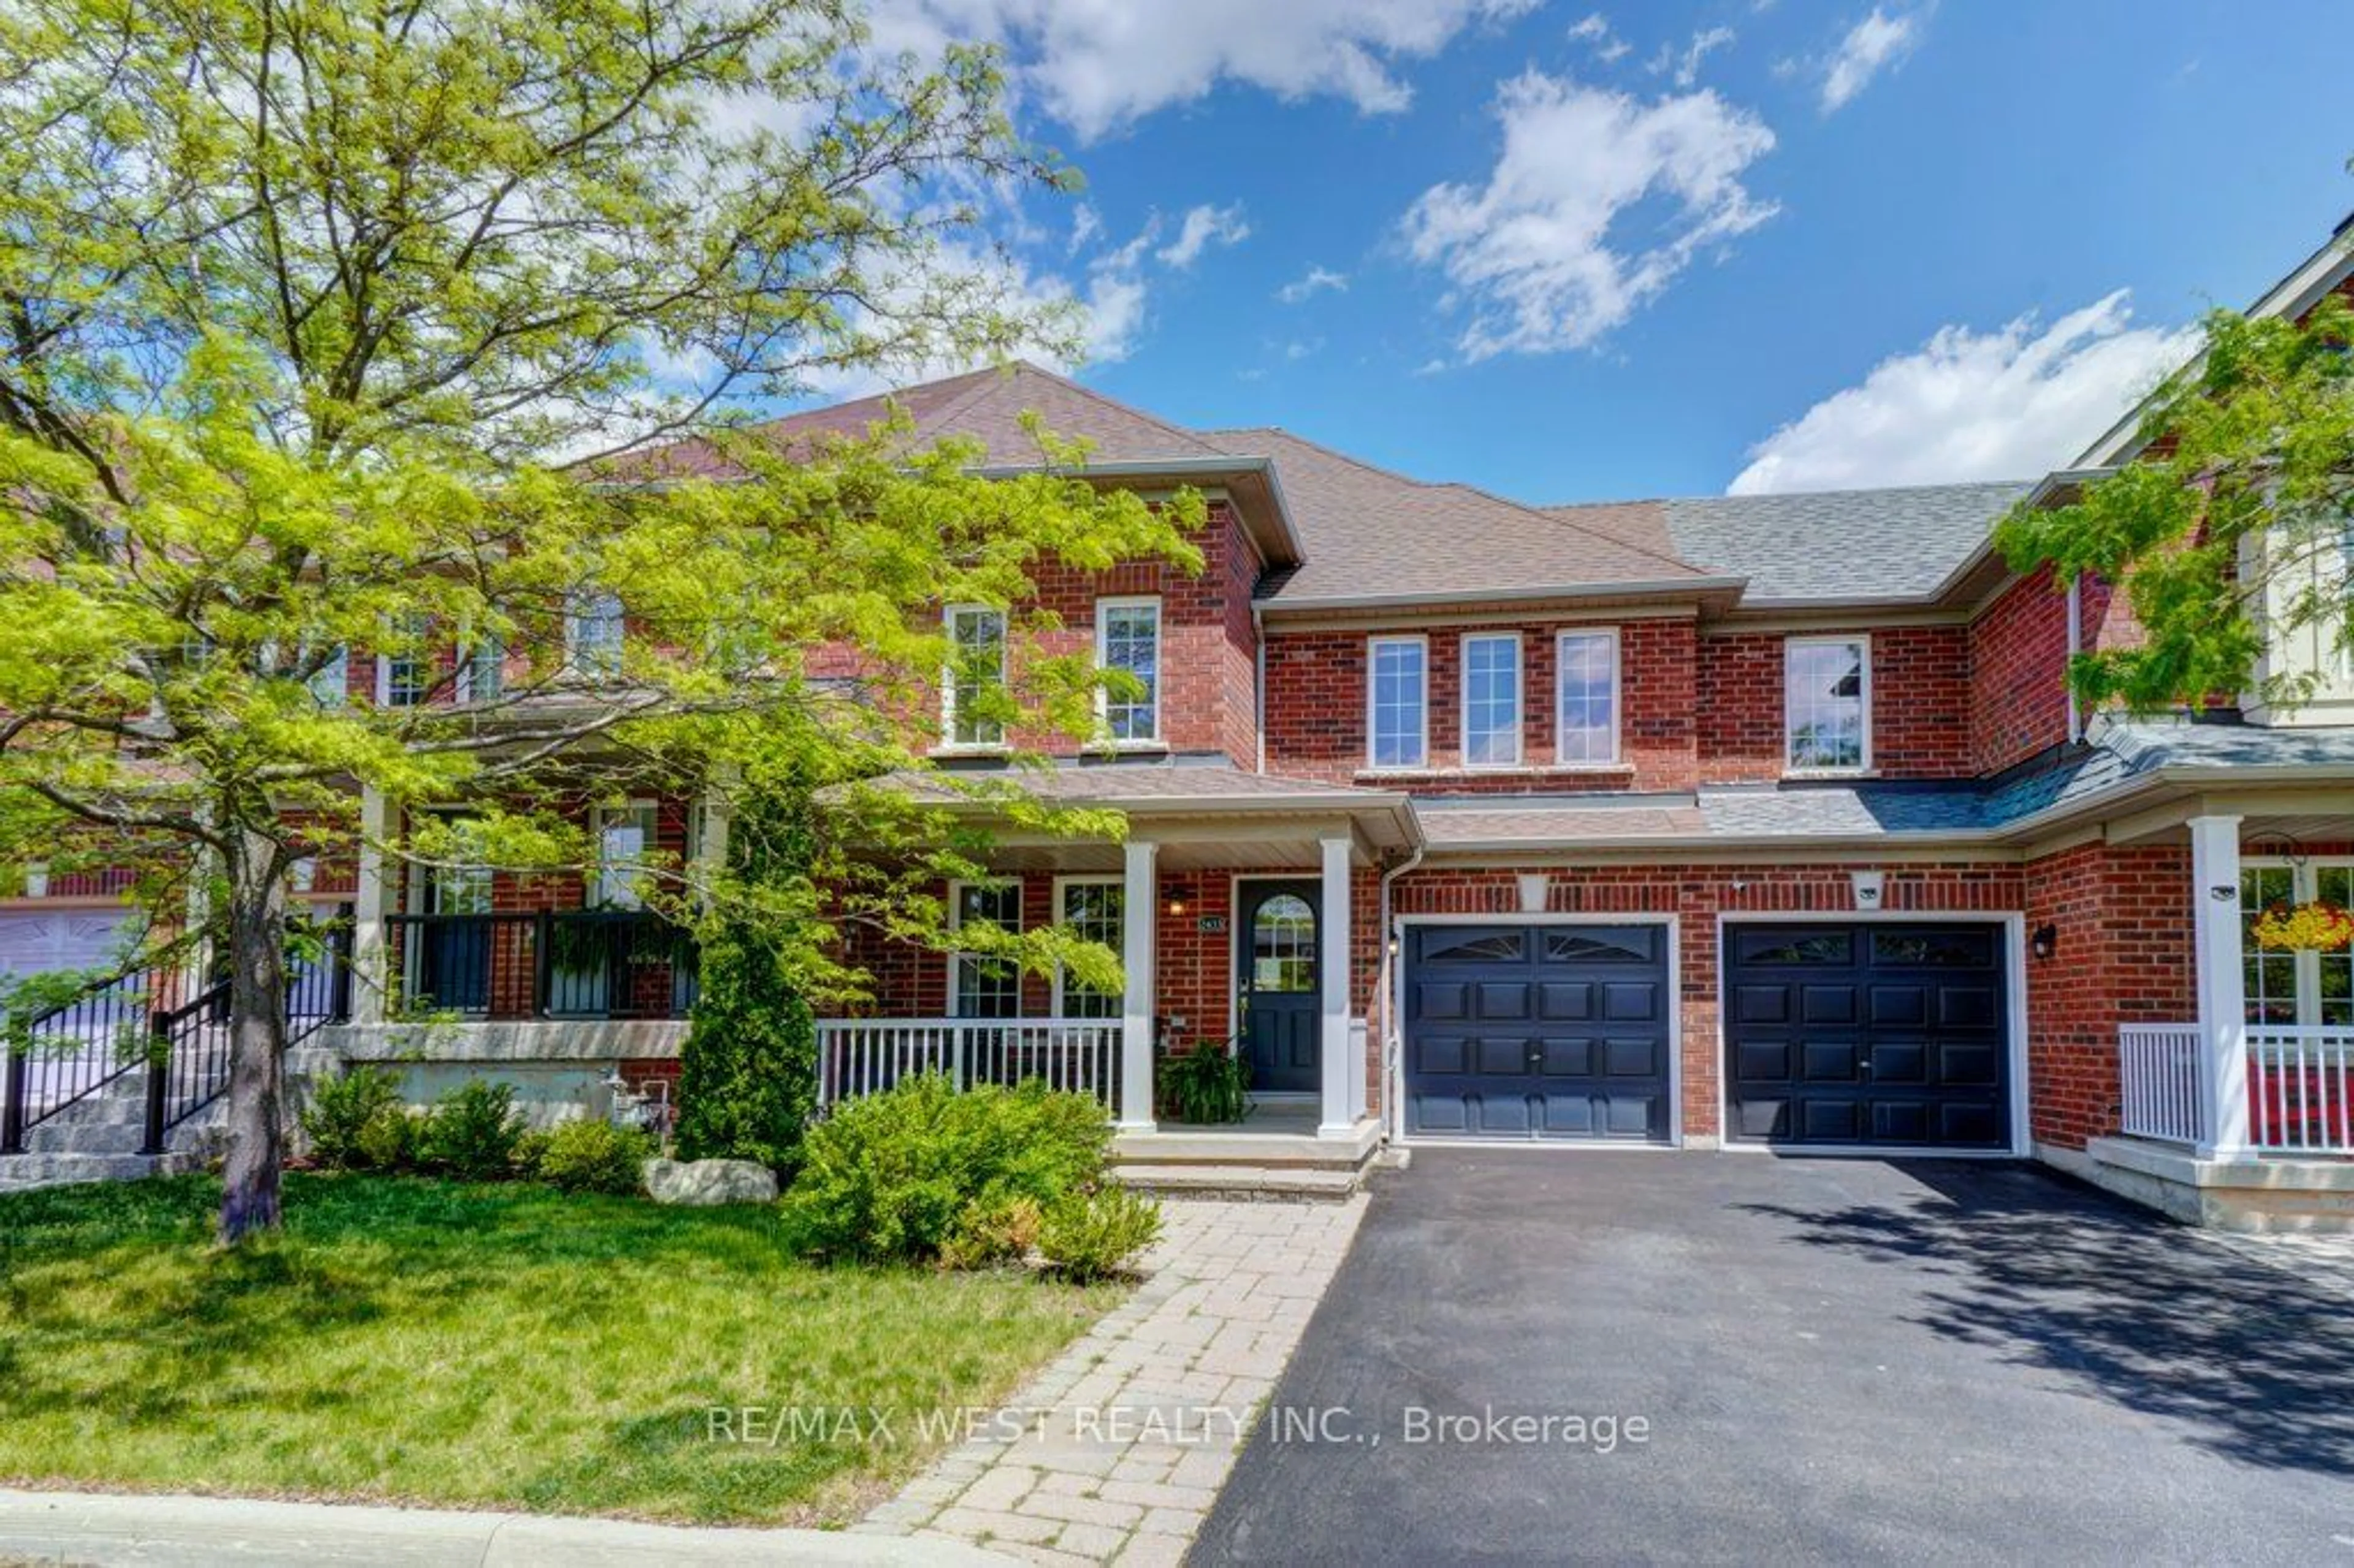 Home with brick exterior material for 2433 Postmaster Dr, Oakville Ontario L6M 0J2